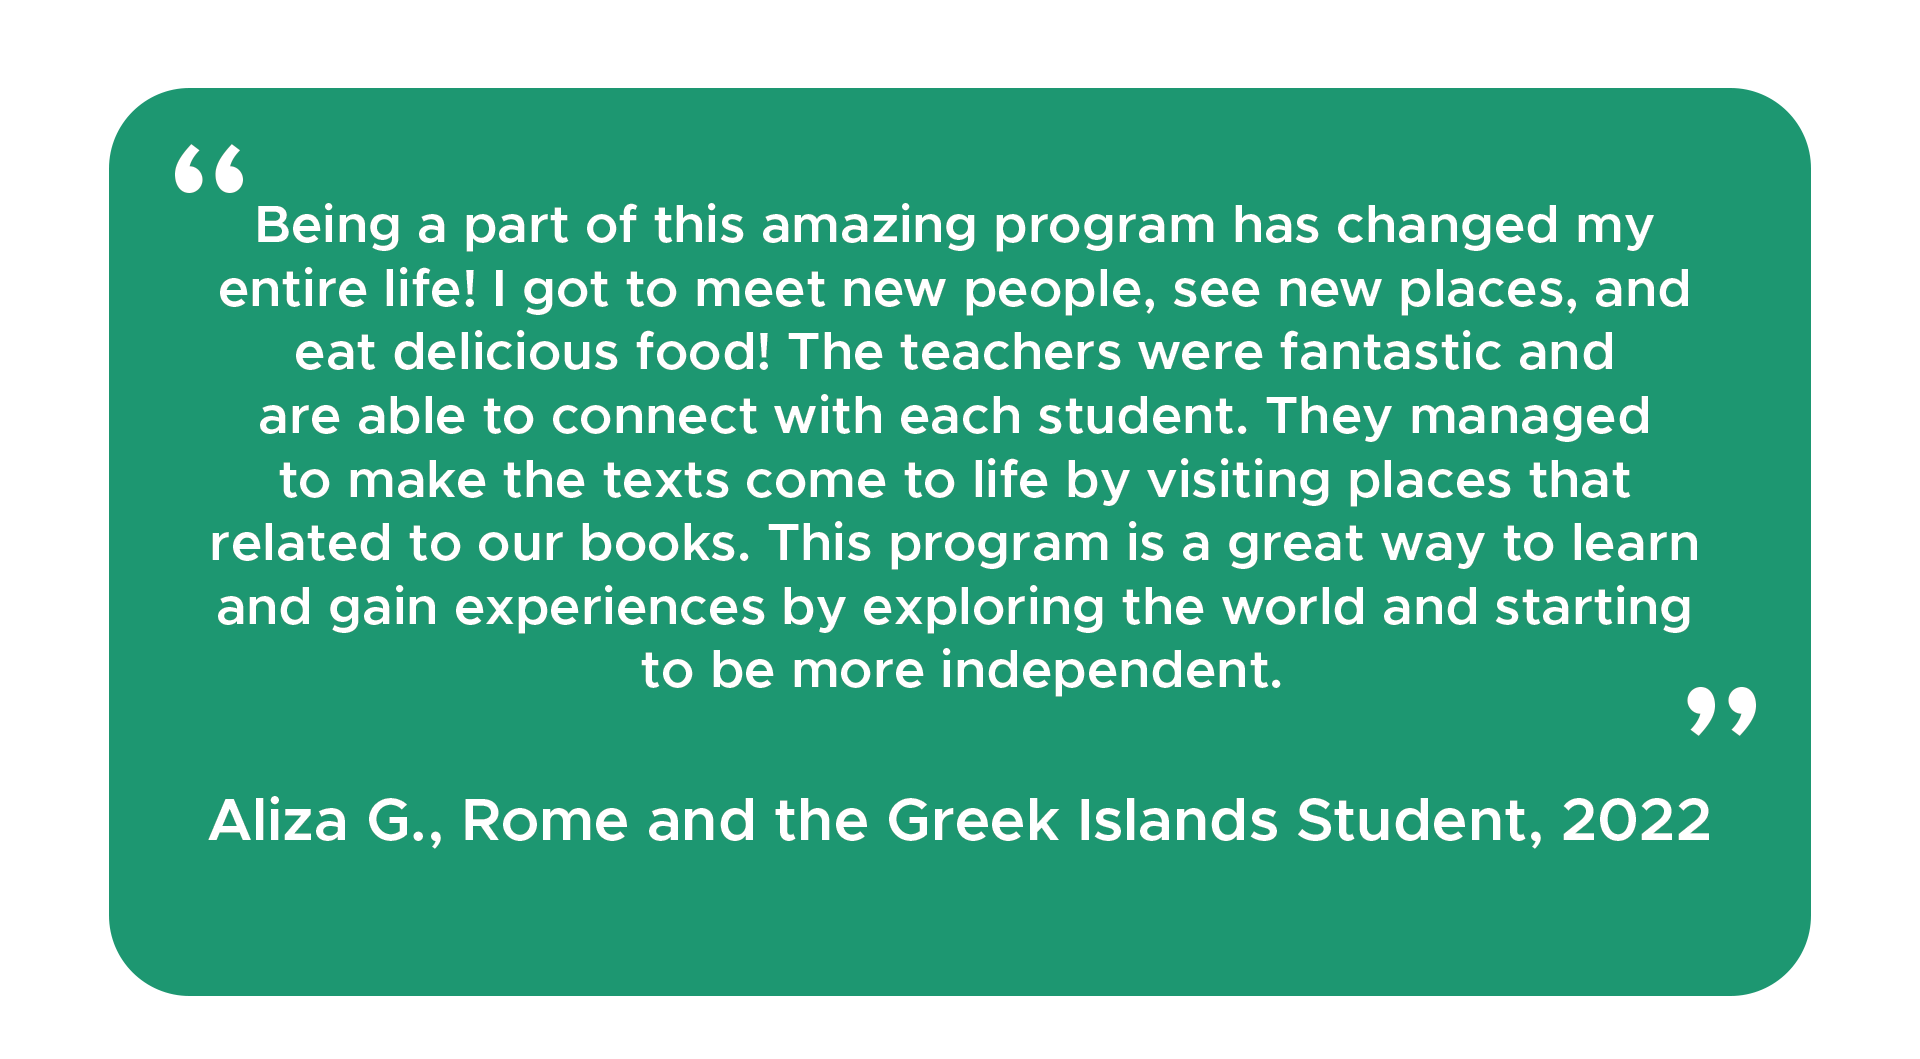 “Being a part of this amazing program has changed my entire life! I got to meet new people, see new places, and eat delicious food! The teachers were fantastic and are able to connect with each student. They managed to make the texts come to life by visiting places that related to our books. This program is a great way to learn and gain experiences by exploring the world and starting to be more independent.” - Aliza G., Rome and the Greek Islands Student, 2022